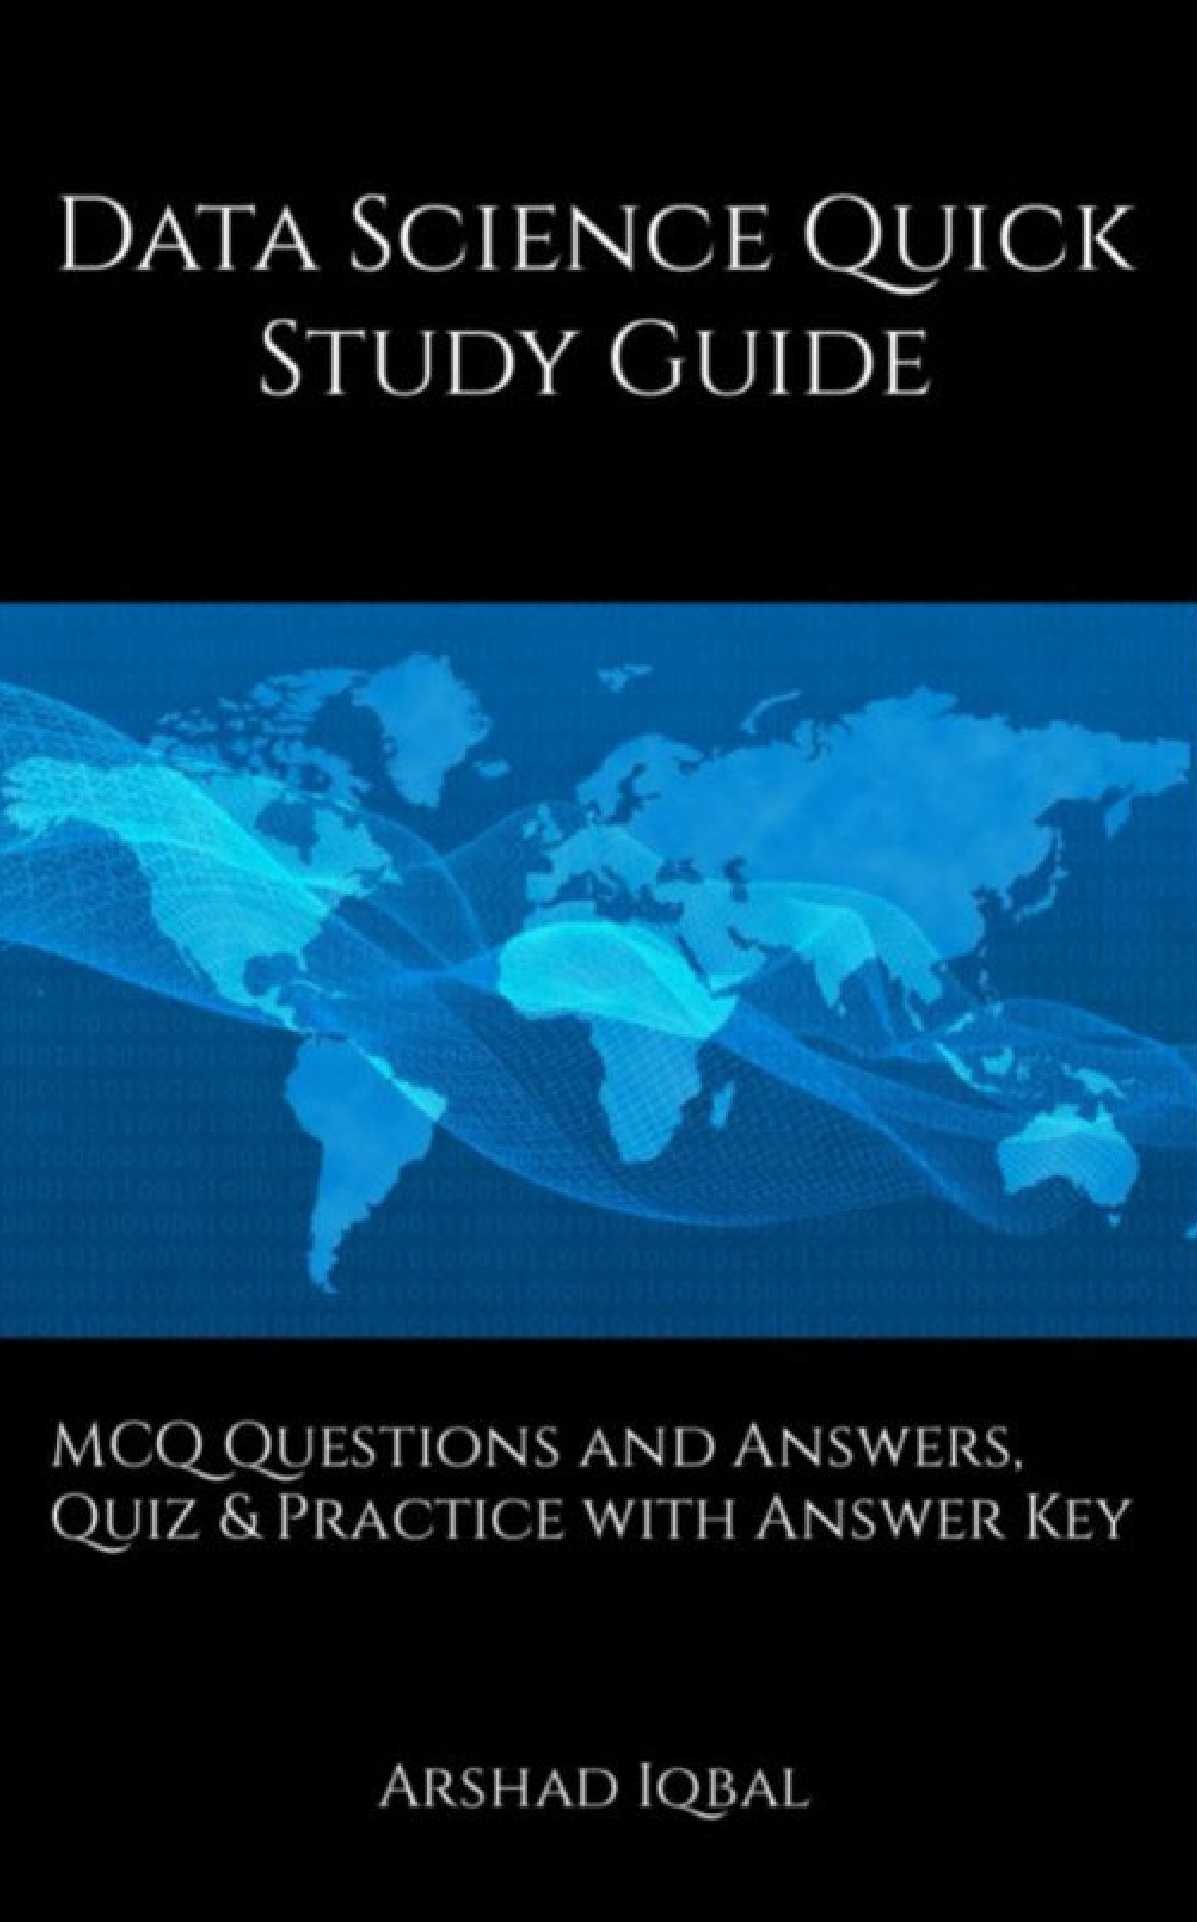 Data Science Quick Study Guide: MCQ Questions and Answers, Quiz & Practice with Answer Key